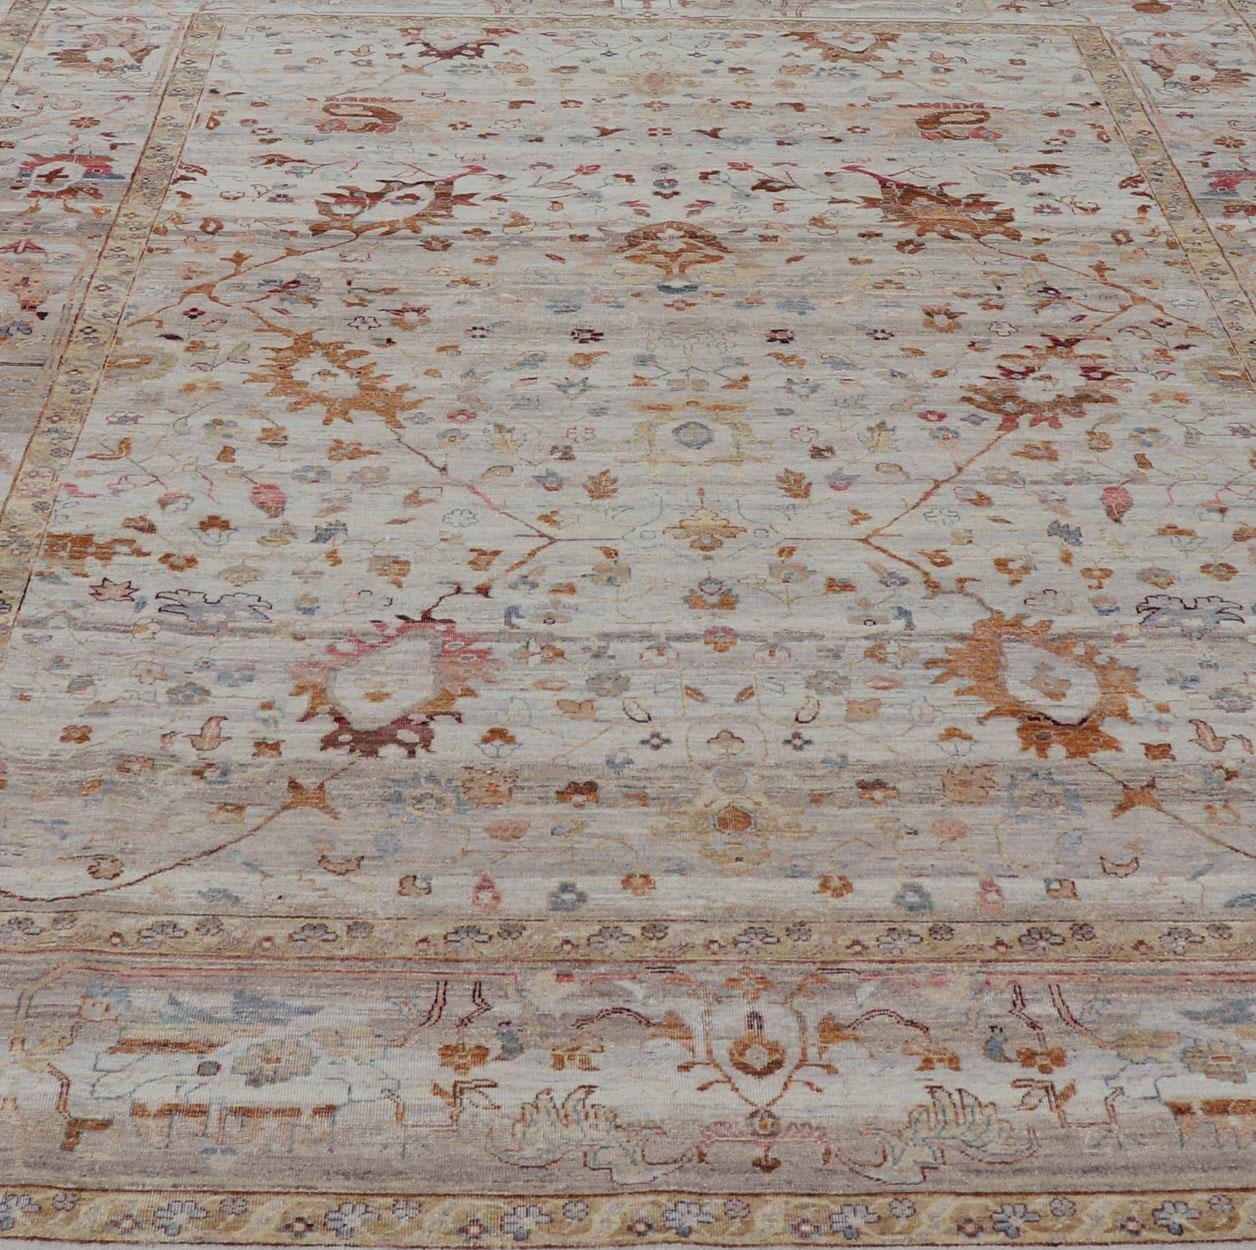 Modern Oushak Muted Rug in Earthy Tones on a Cream Background. Country of Origin: India; Type: Oushak; Design: All-Over, Floral, Oushak Floral; Keivan Woven Arts: rug PUR-31486; All Gray Indian Oushak Rug With All-Over Floral Design in Wool; Floral